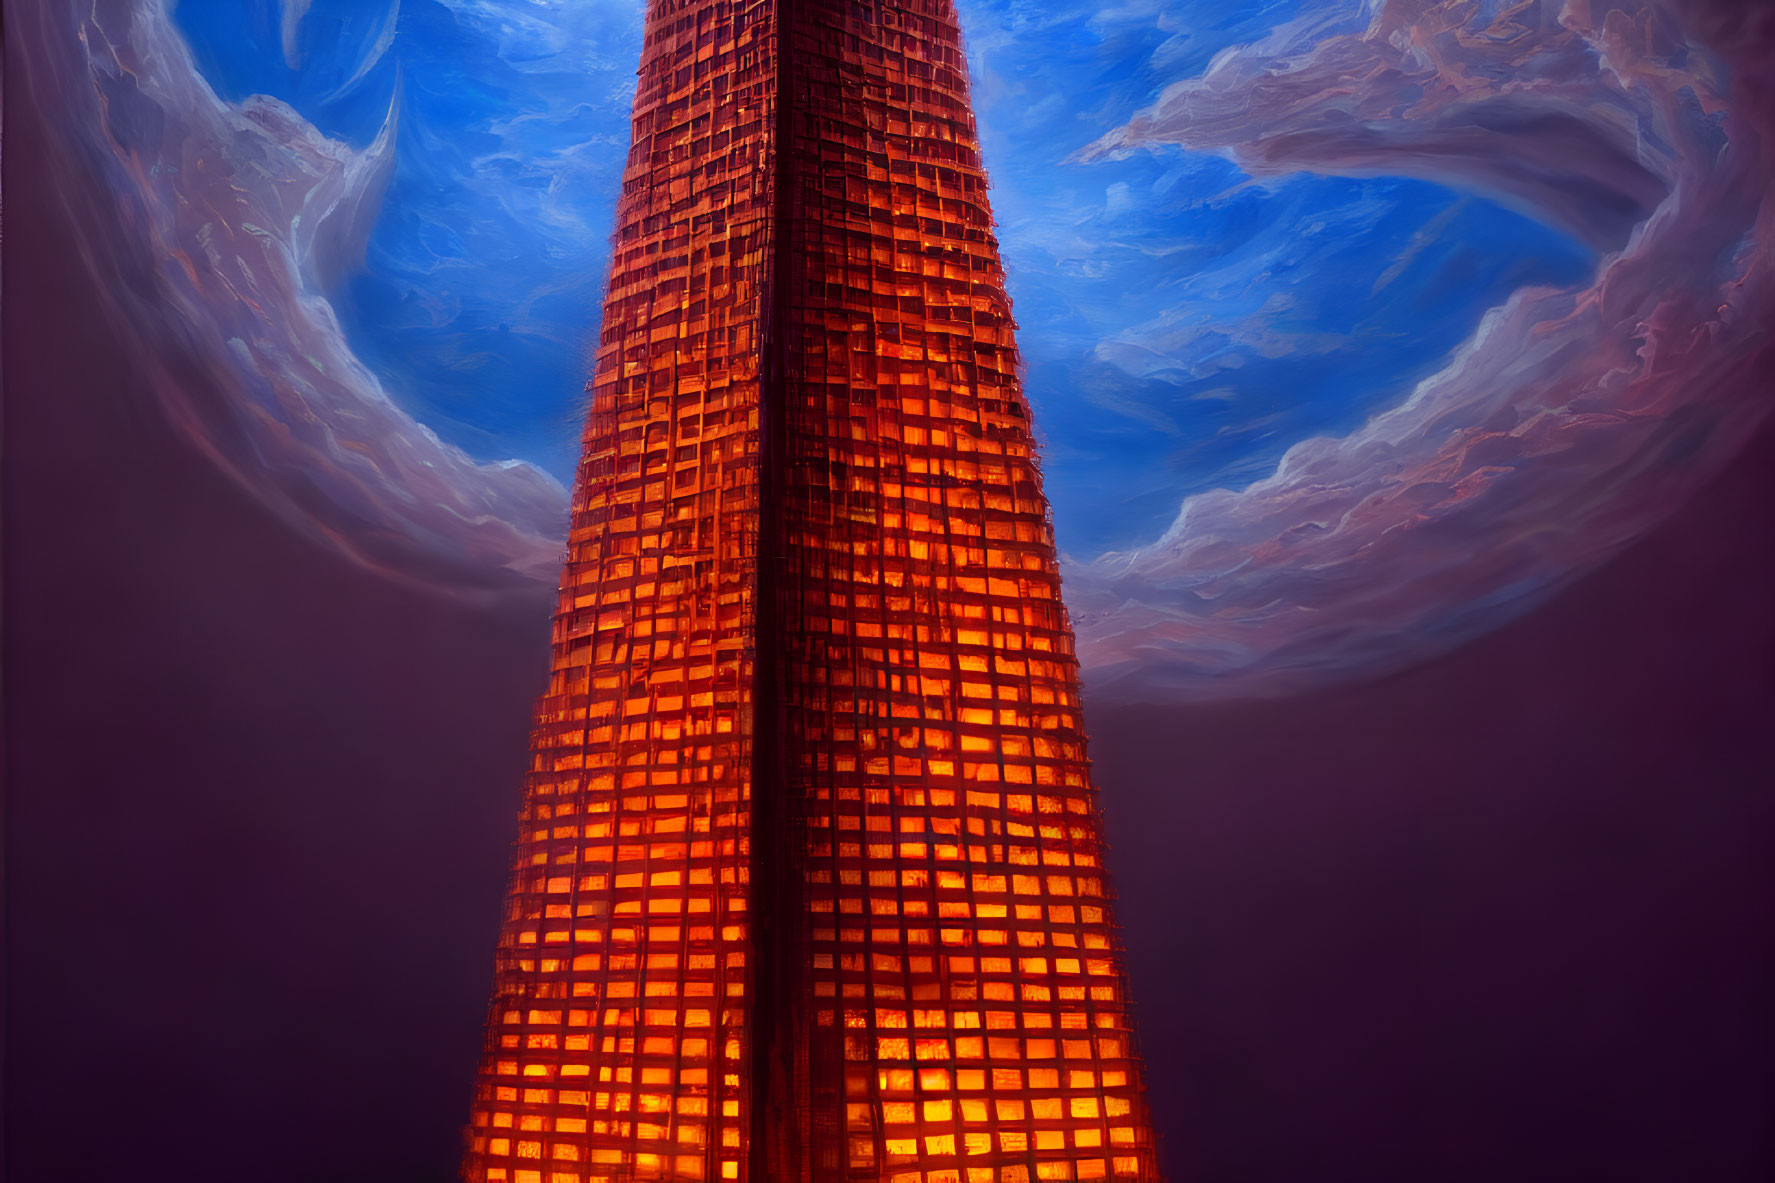 Dramatic red skyscraper in swirling purple and blue sky